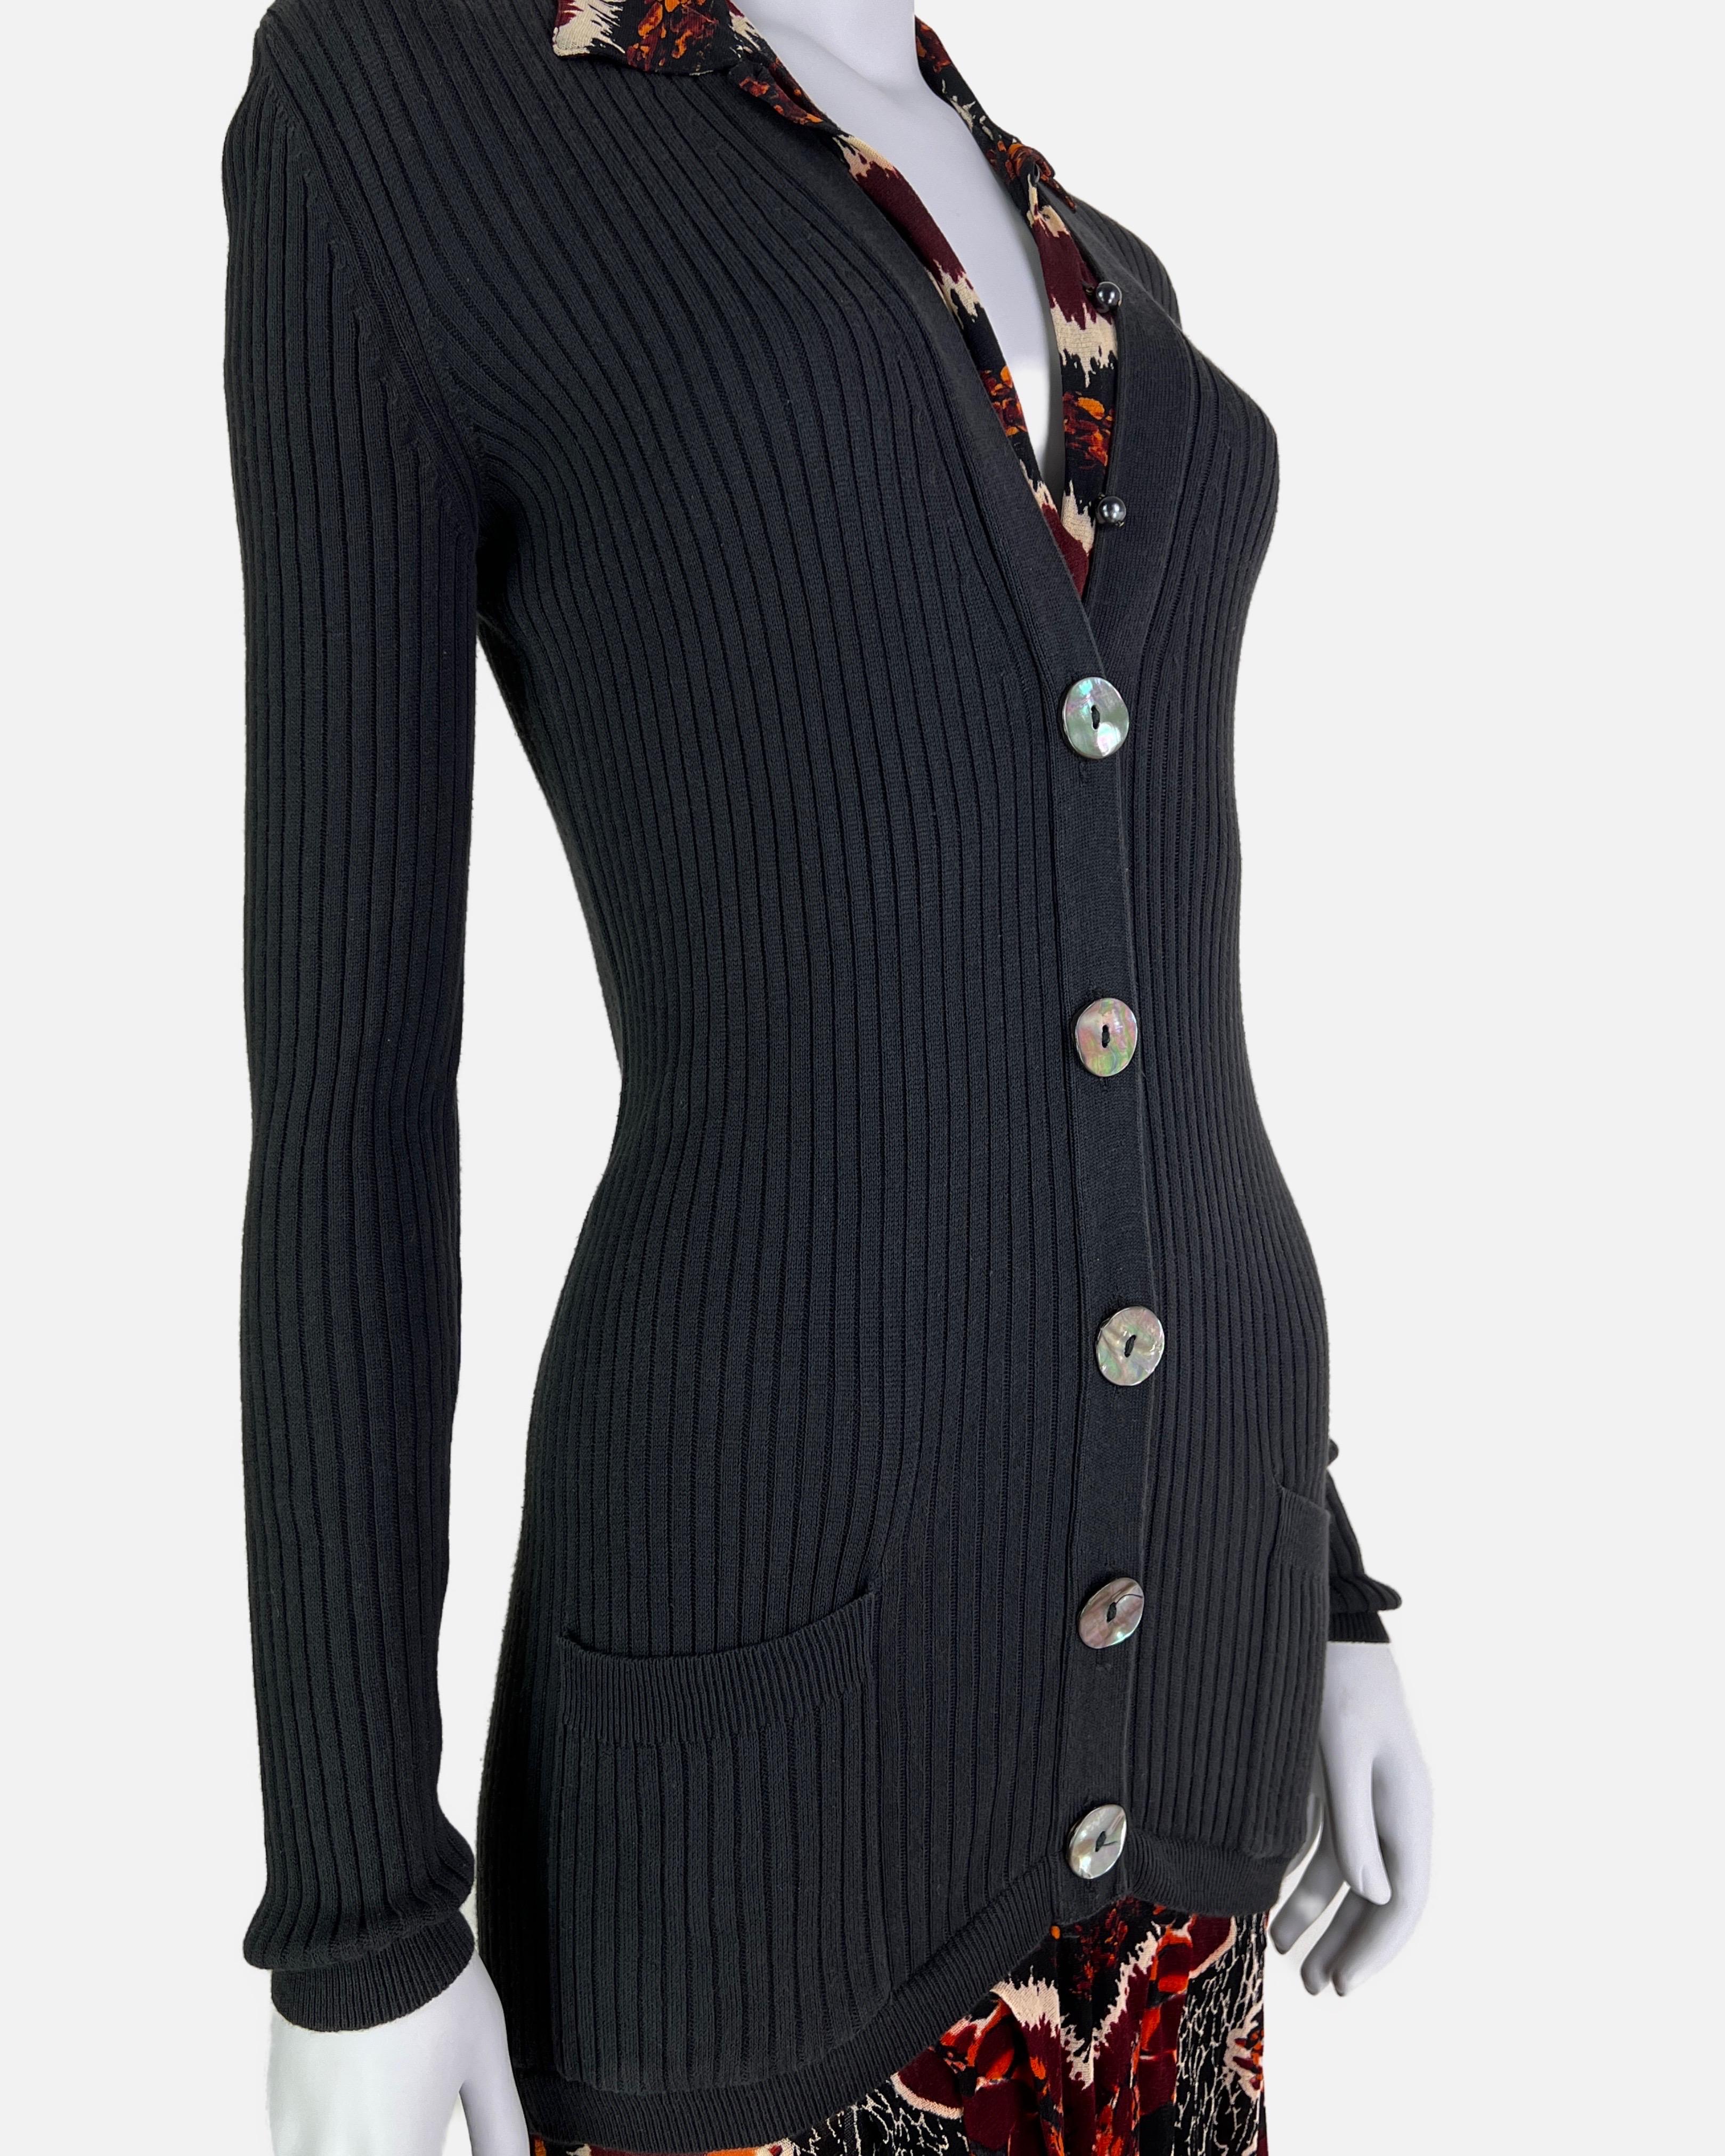 Jean-Paul Gaultier Spring 1997 Runway Cardigan-Dress In Good Condition For Sale In Prague, CZ